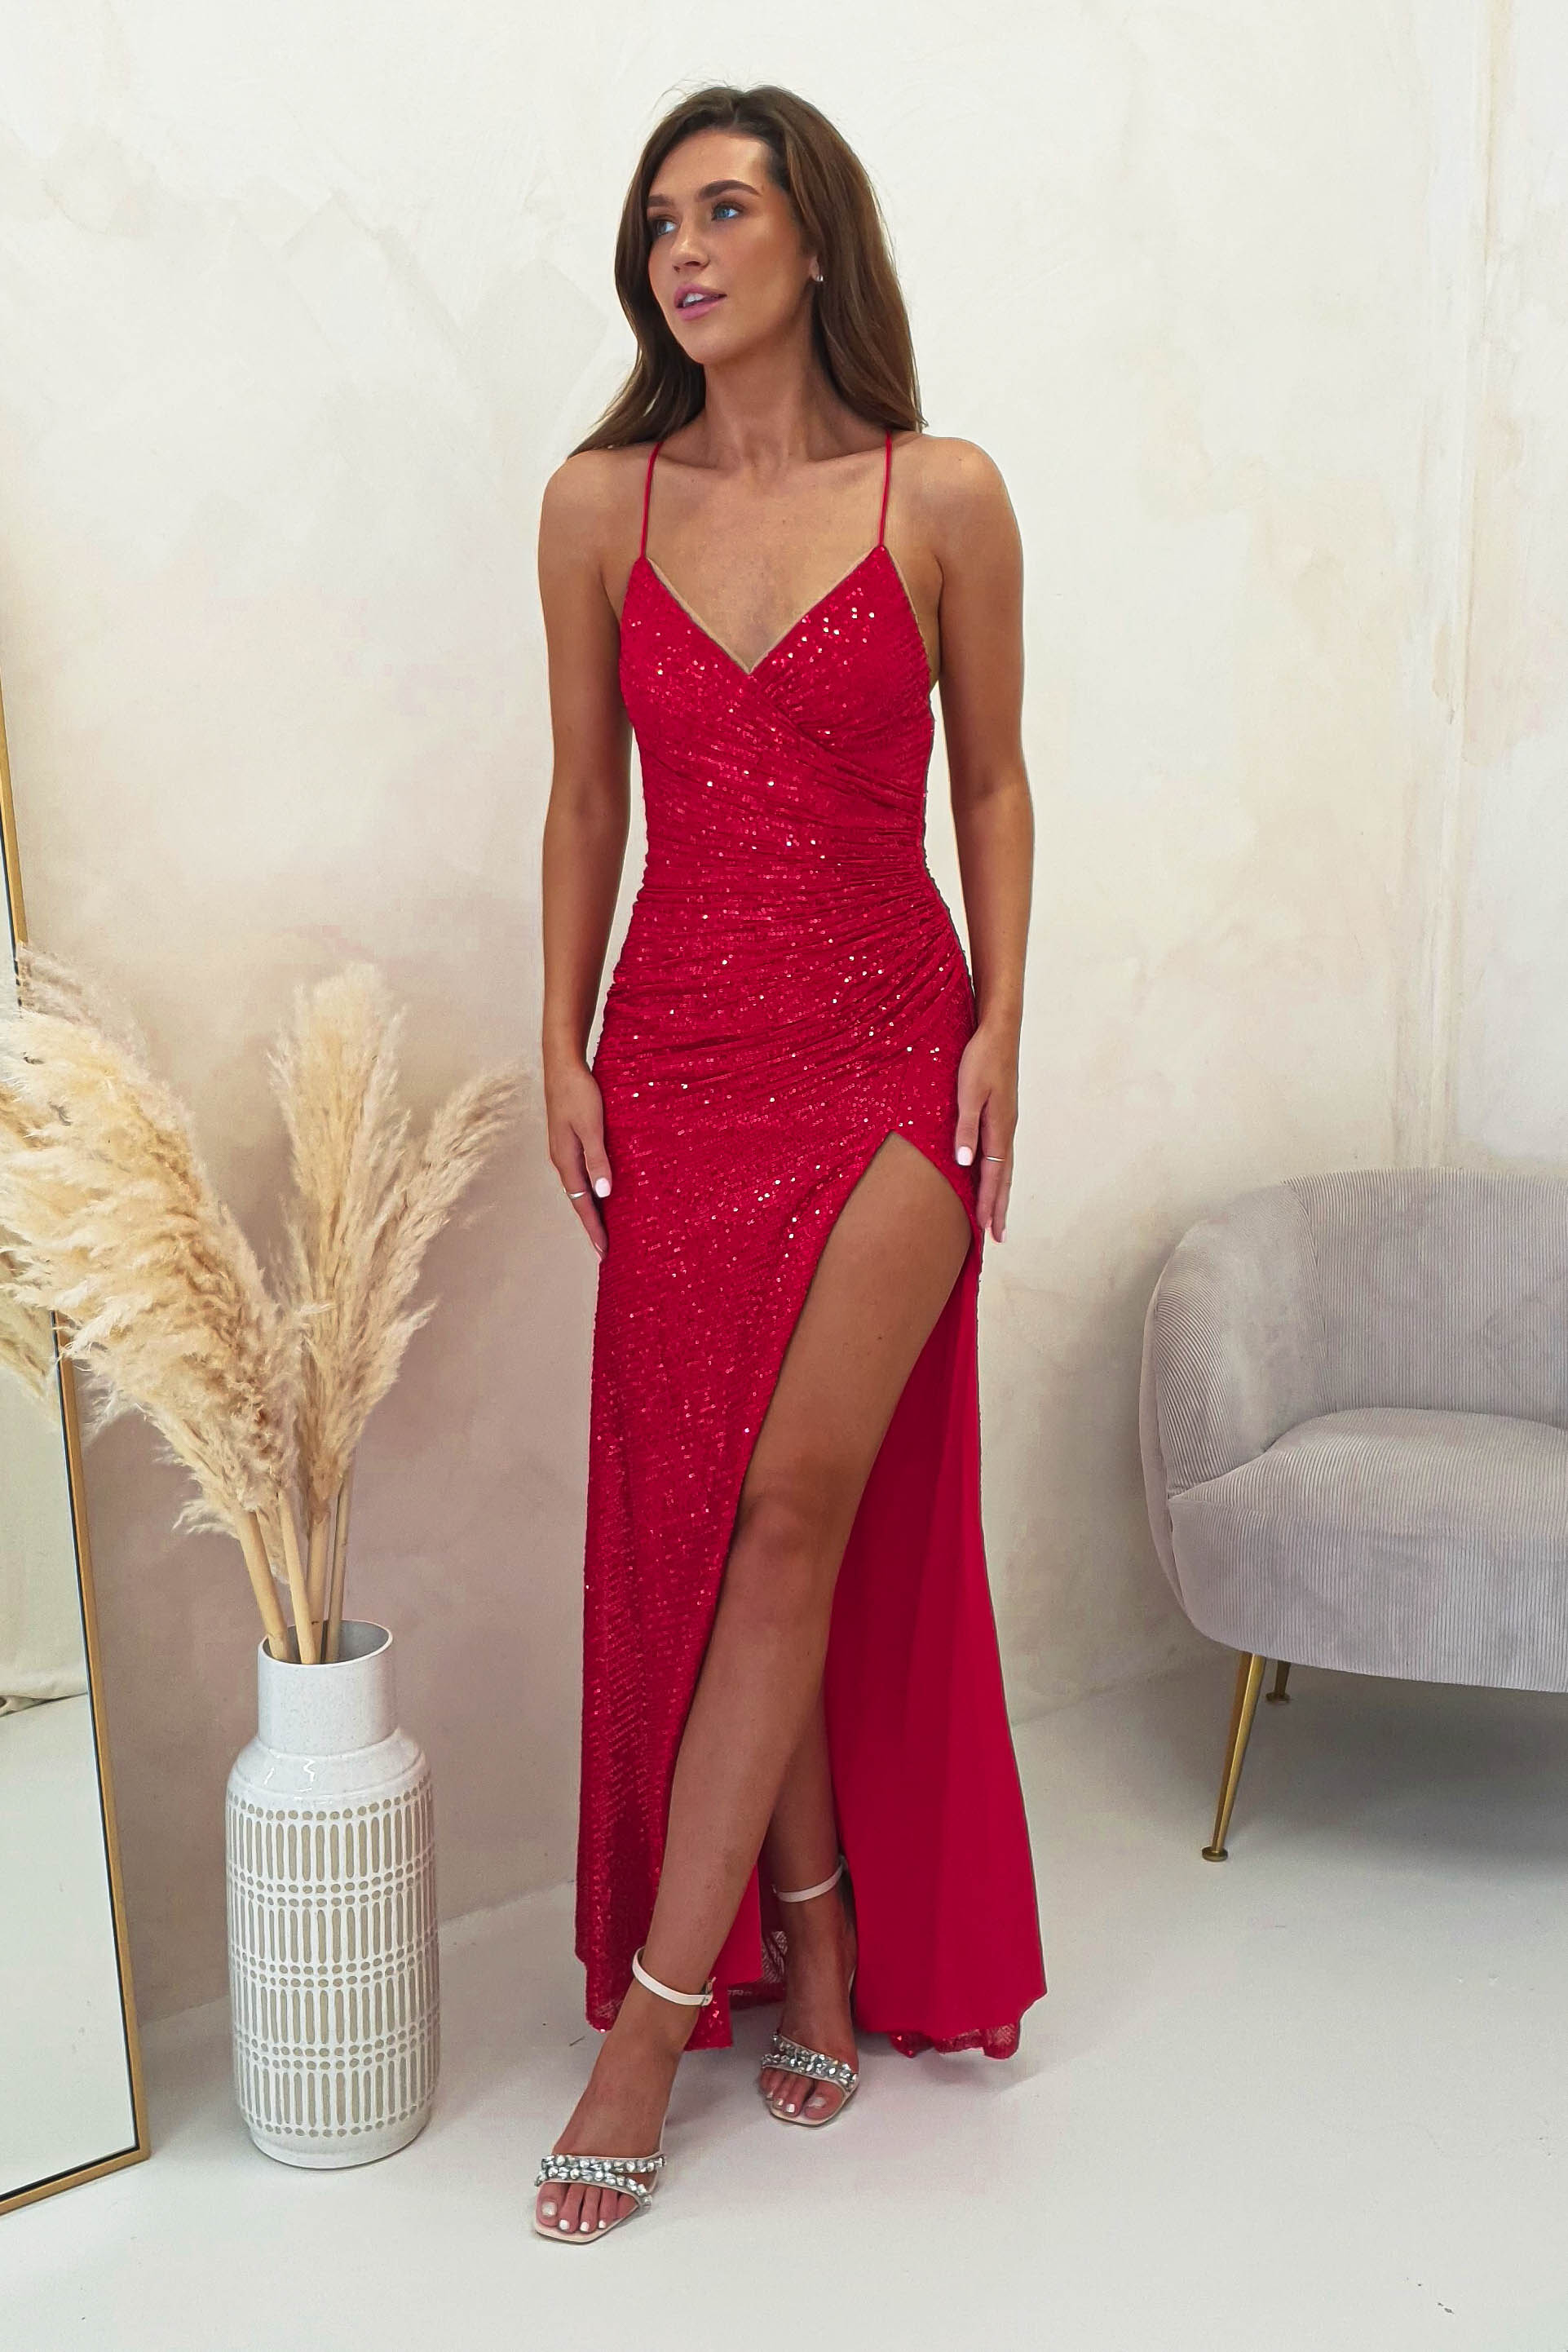 kalila-sequin-gown-red-kalila-gown-gold-red-sequin-oh-hello-clothing-50460786327893.jpg